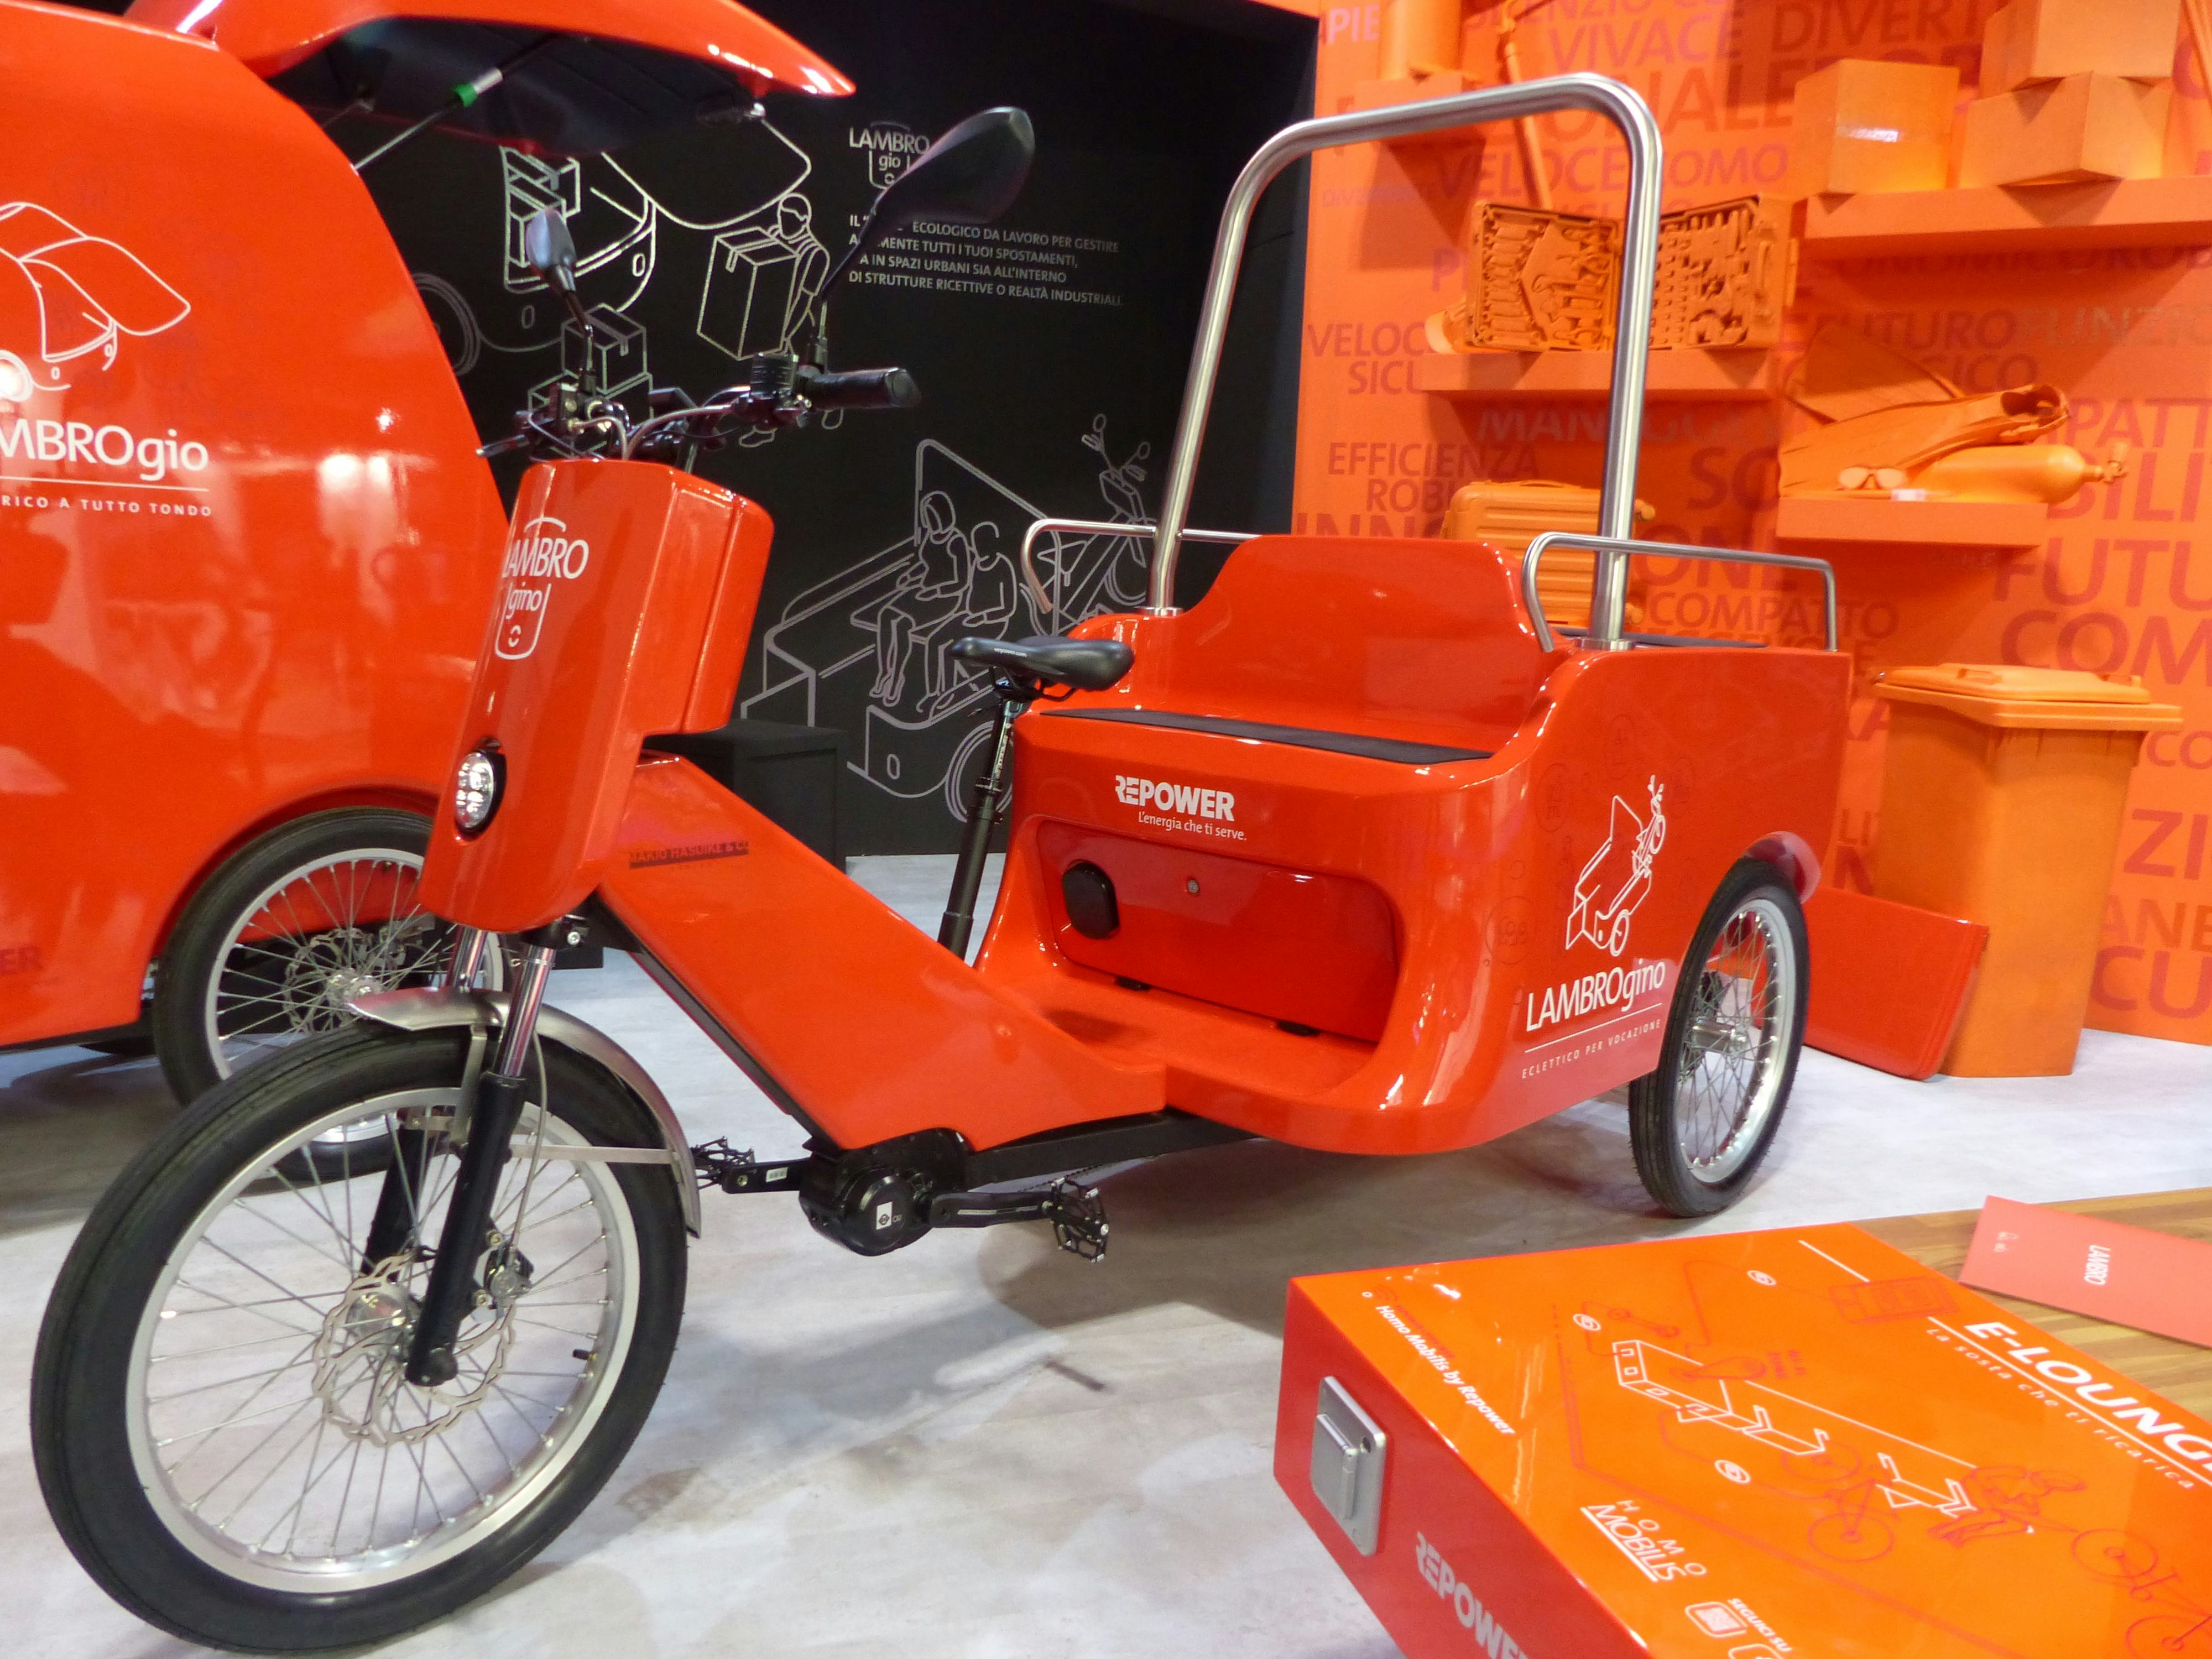 Repower’s people mover Lambrogino has one open compartment which can be equipped with a passenger bench. - Photo Bike Europe